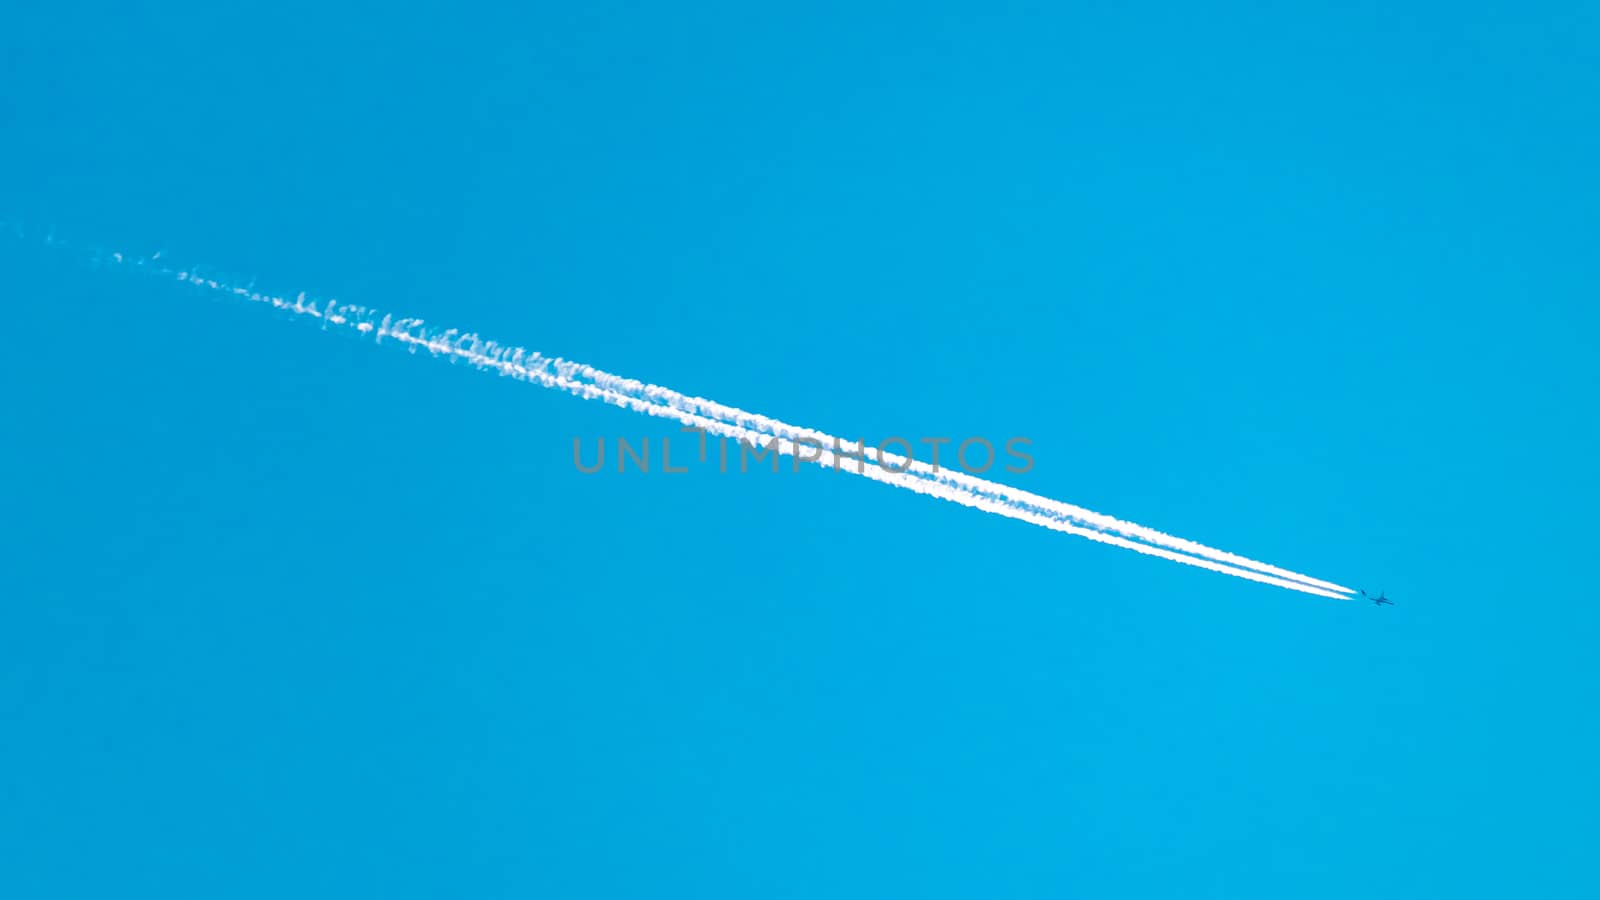 Airplane Vapor Trail Streaking Across a Blue Sky by colintemple